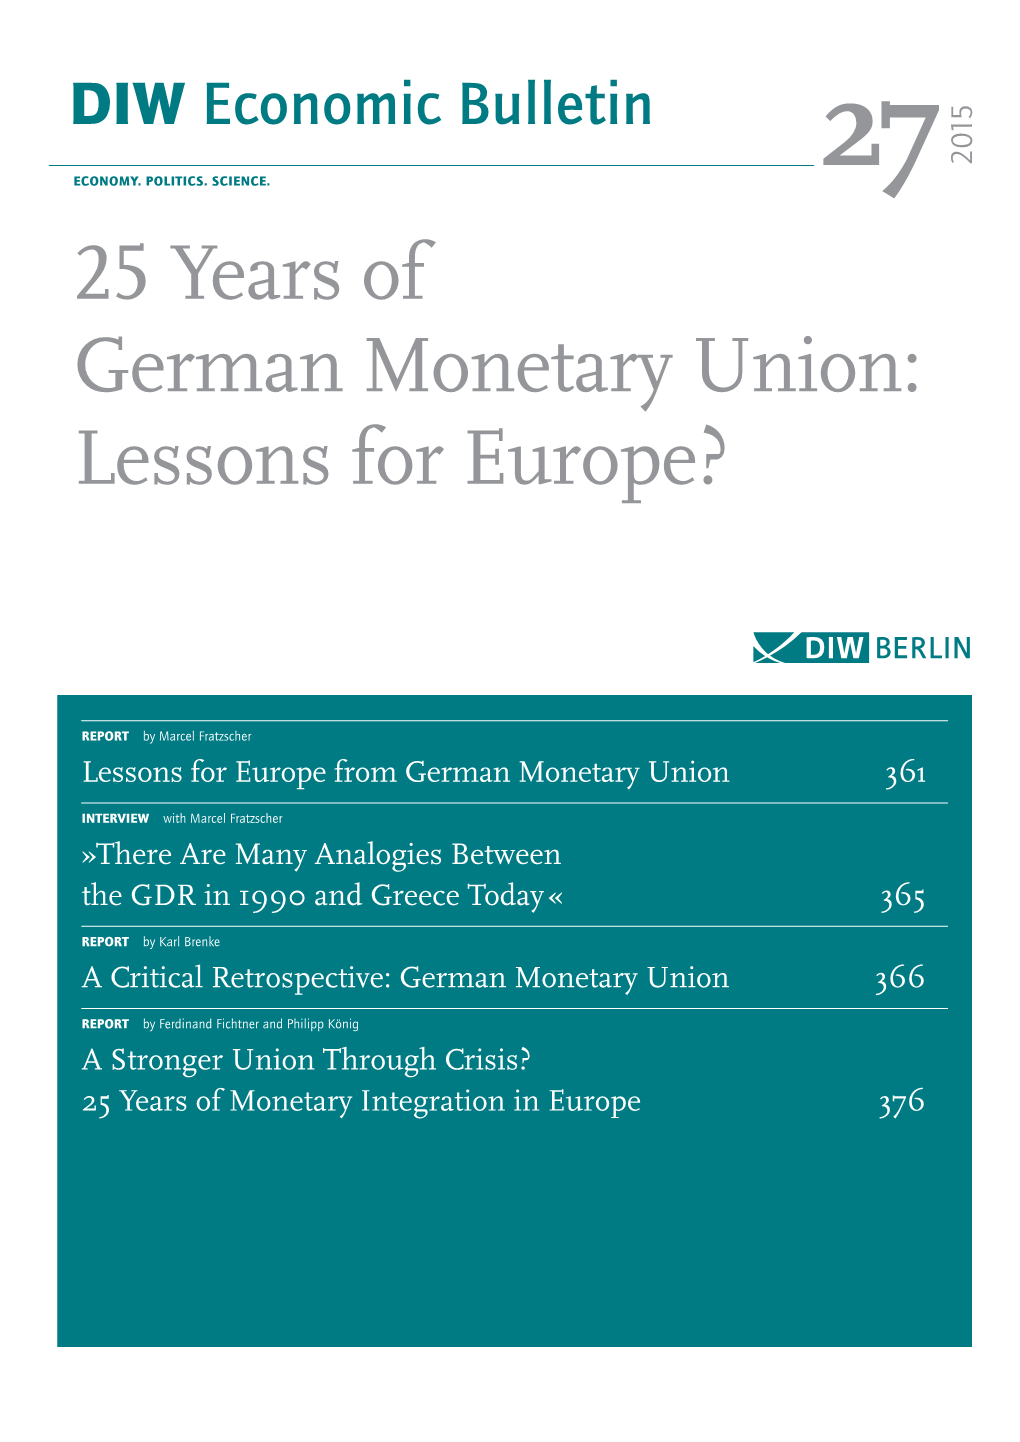 25 Years of German Monetary Union: Lessons for Europe?